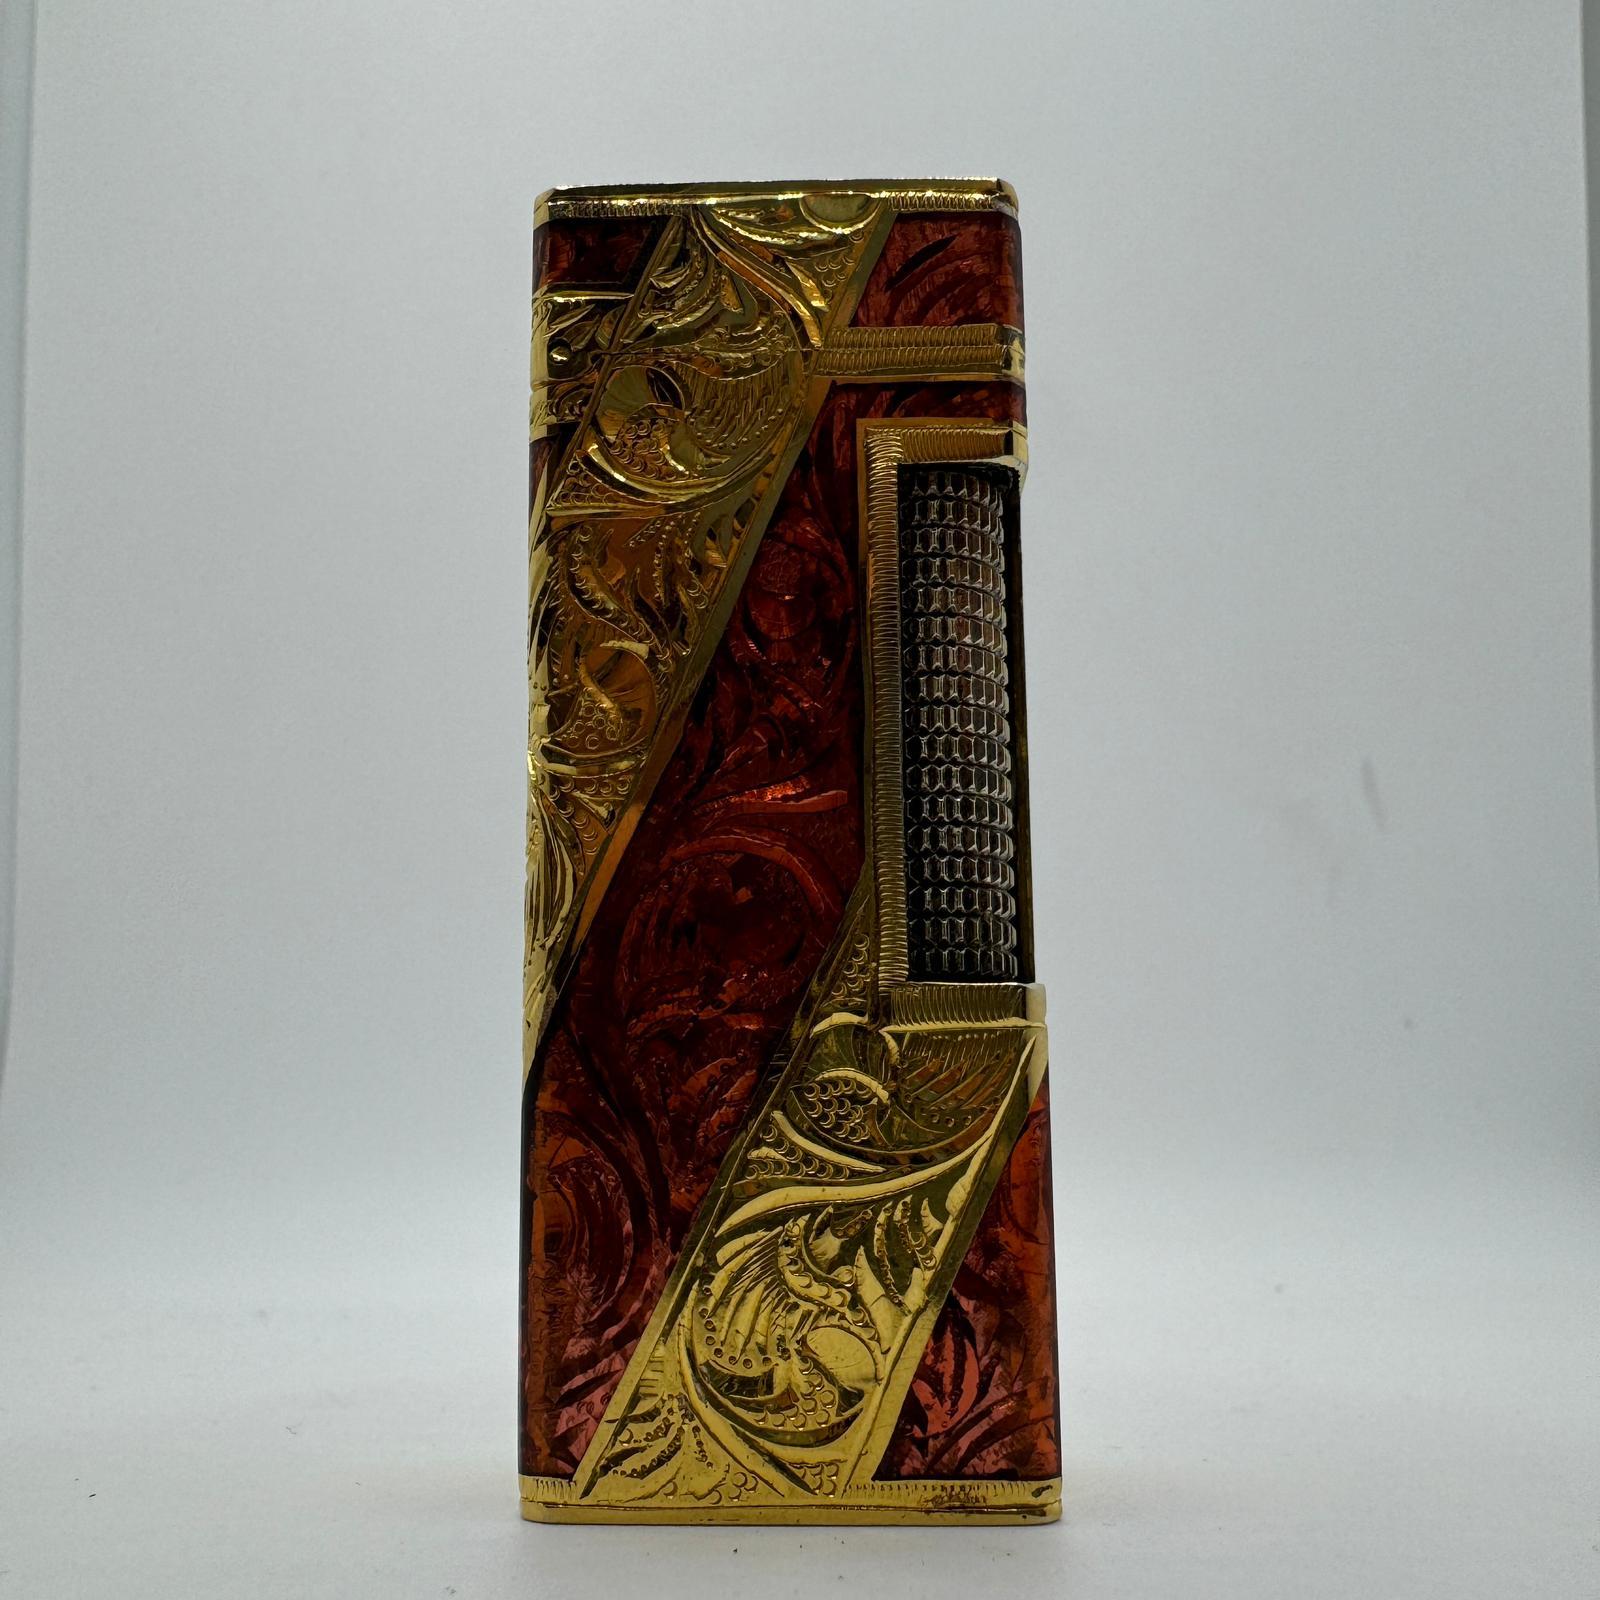 Dunhill Rare Royking Lighter, 18k Gold Plating & Enamel Inlay  “Royking” lighter.
Circe 1980
Roy King Rollagas, a Unique RARE example of a ROYKING designed lighter made circa 1970's, 18K Gold Baroque Inlay with, Red, Blue lacquer, mint